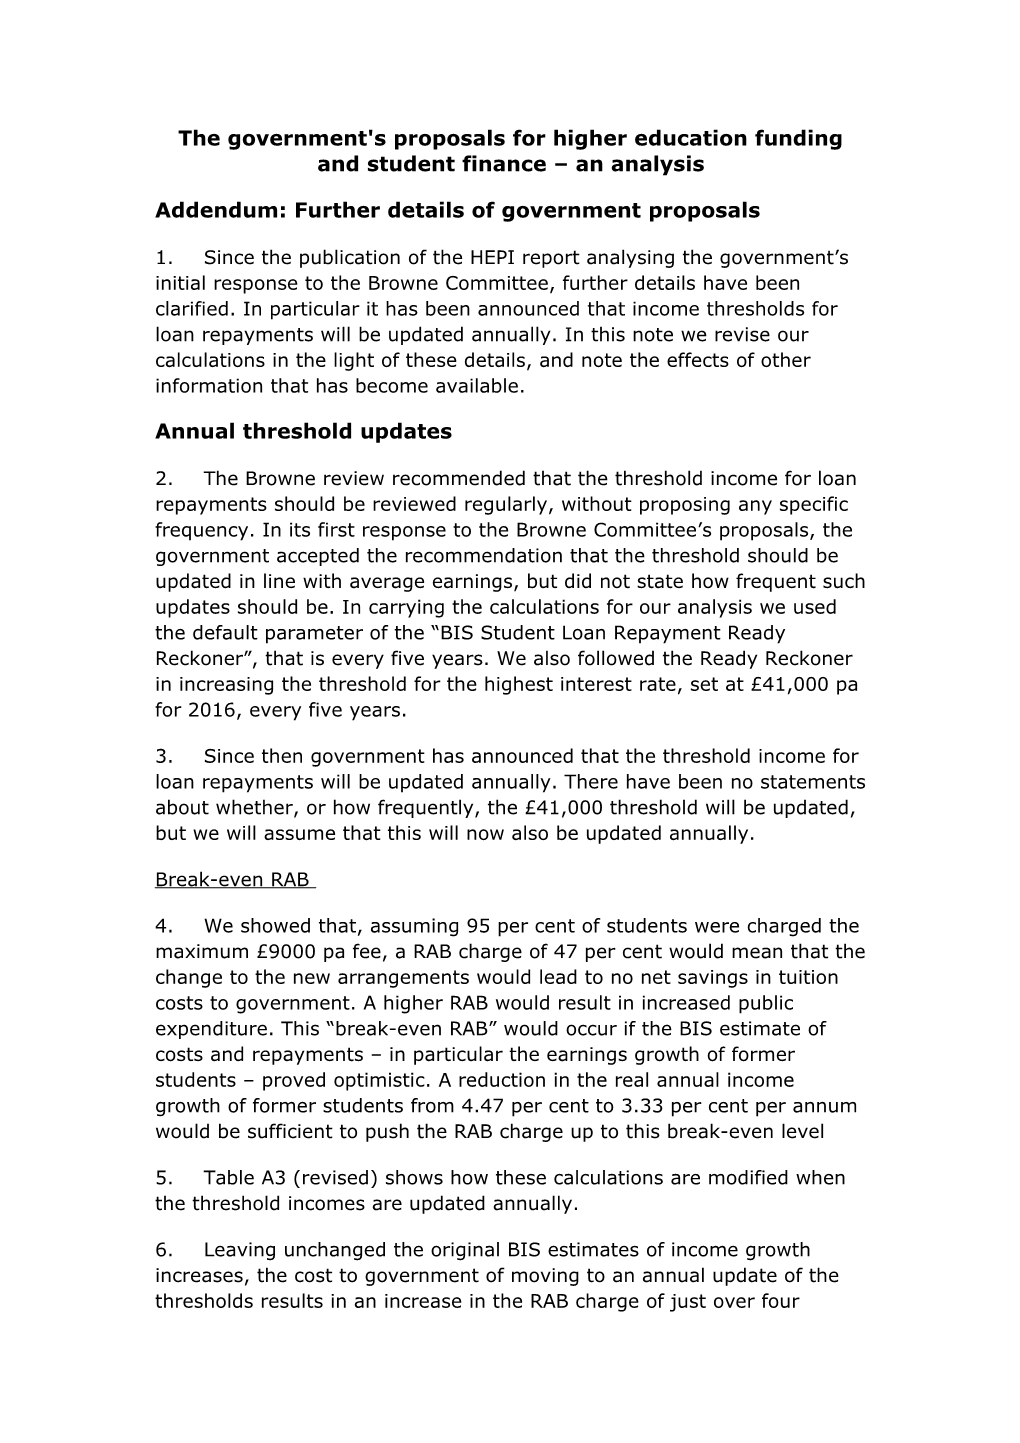 The Government's Proposals for Higher Education Funding and Student Finance an Analysis